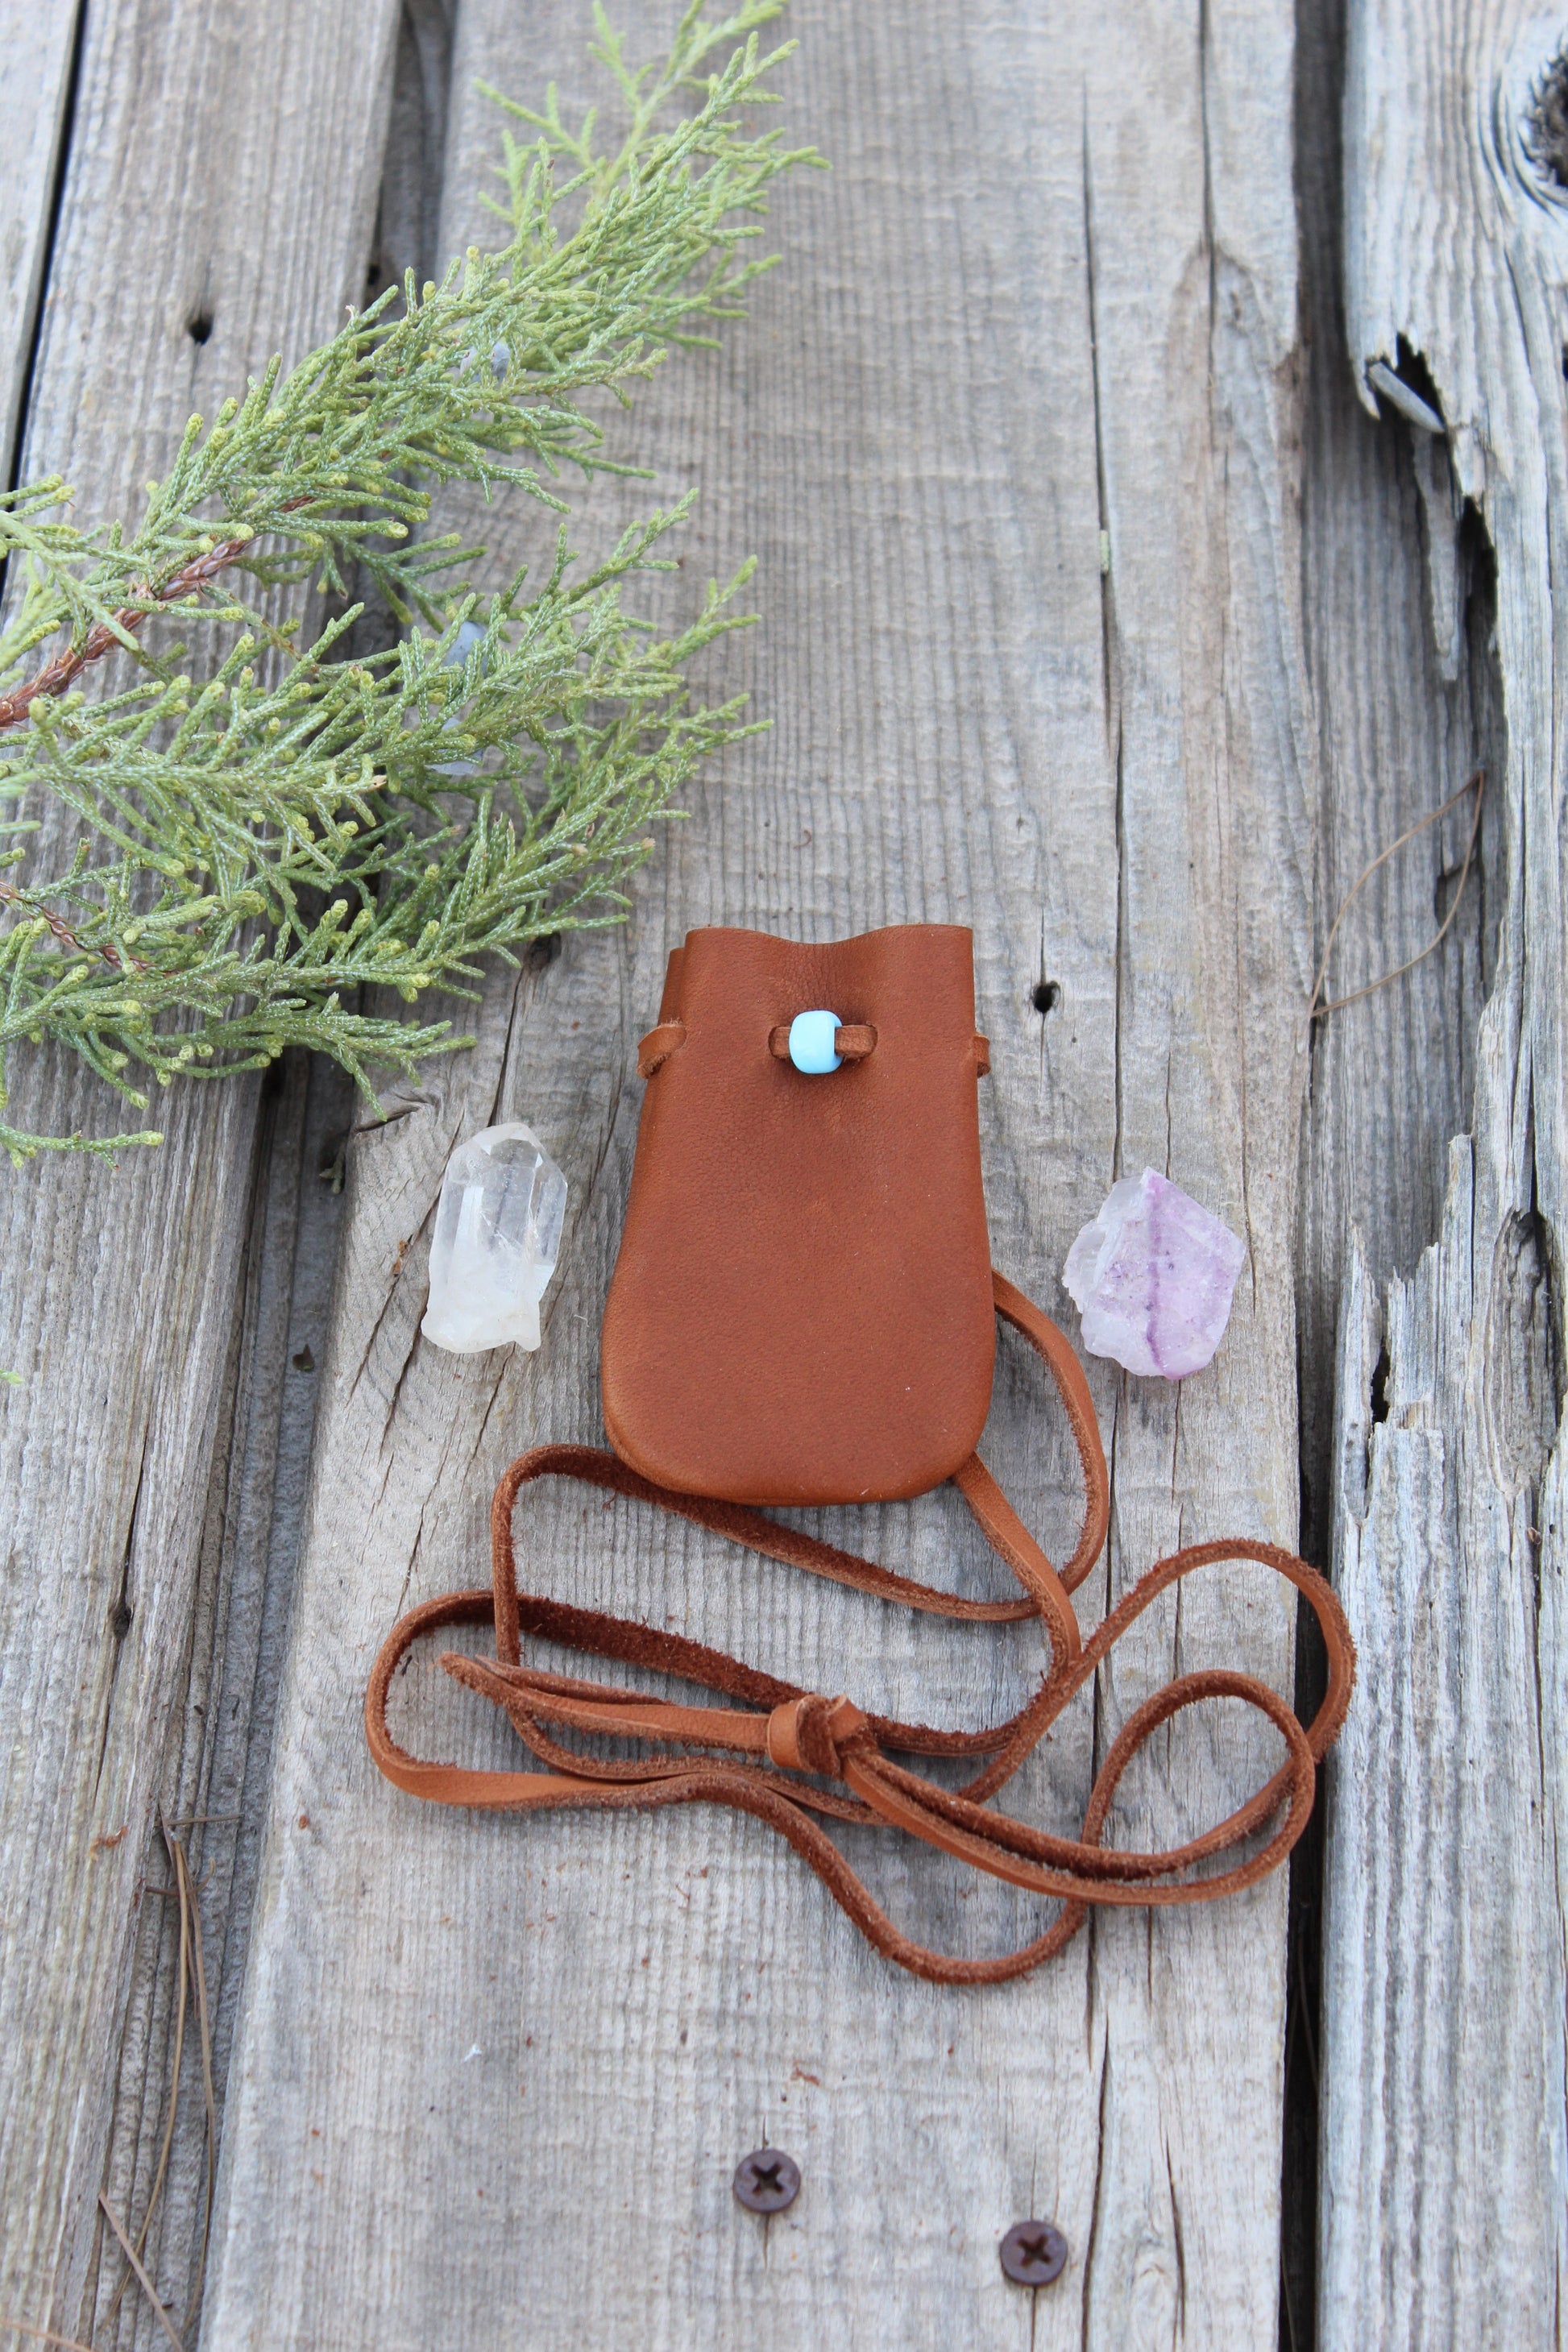 Leather Pouch Mini, Leather Medicine Bag Necklace, Small Pouch to Hold  Healing Crystals, Native American Inspired, Talisman Pouch Pendant 